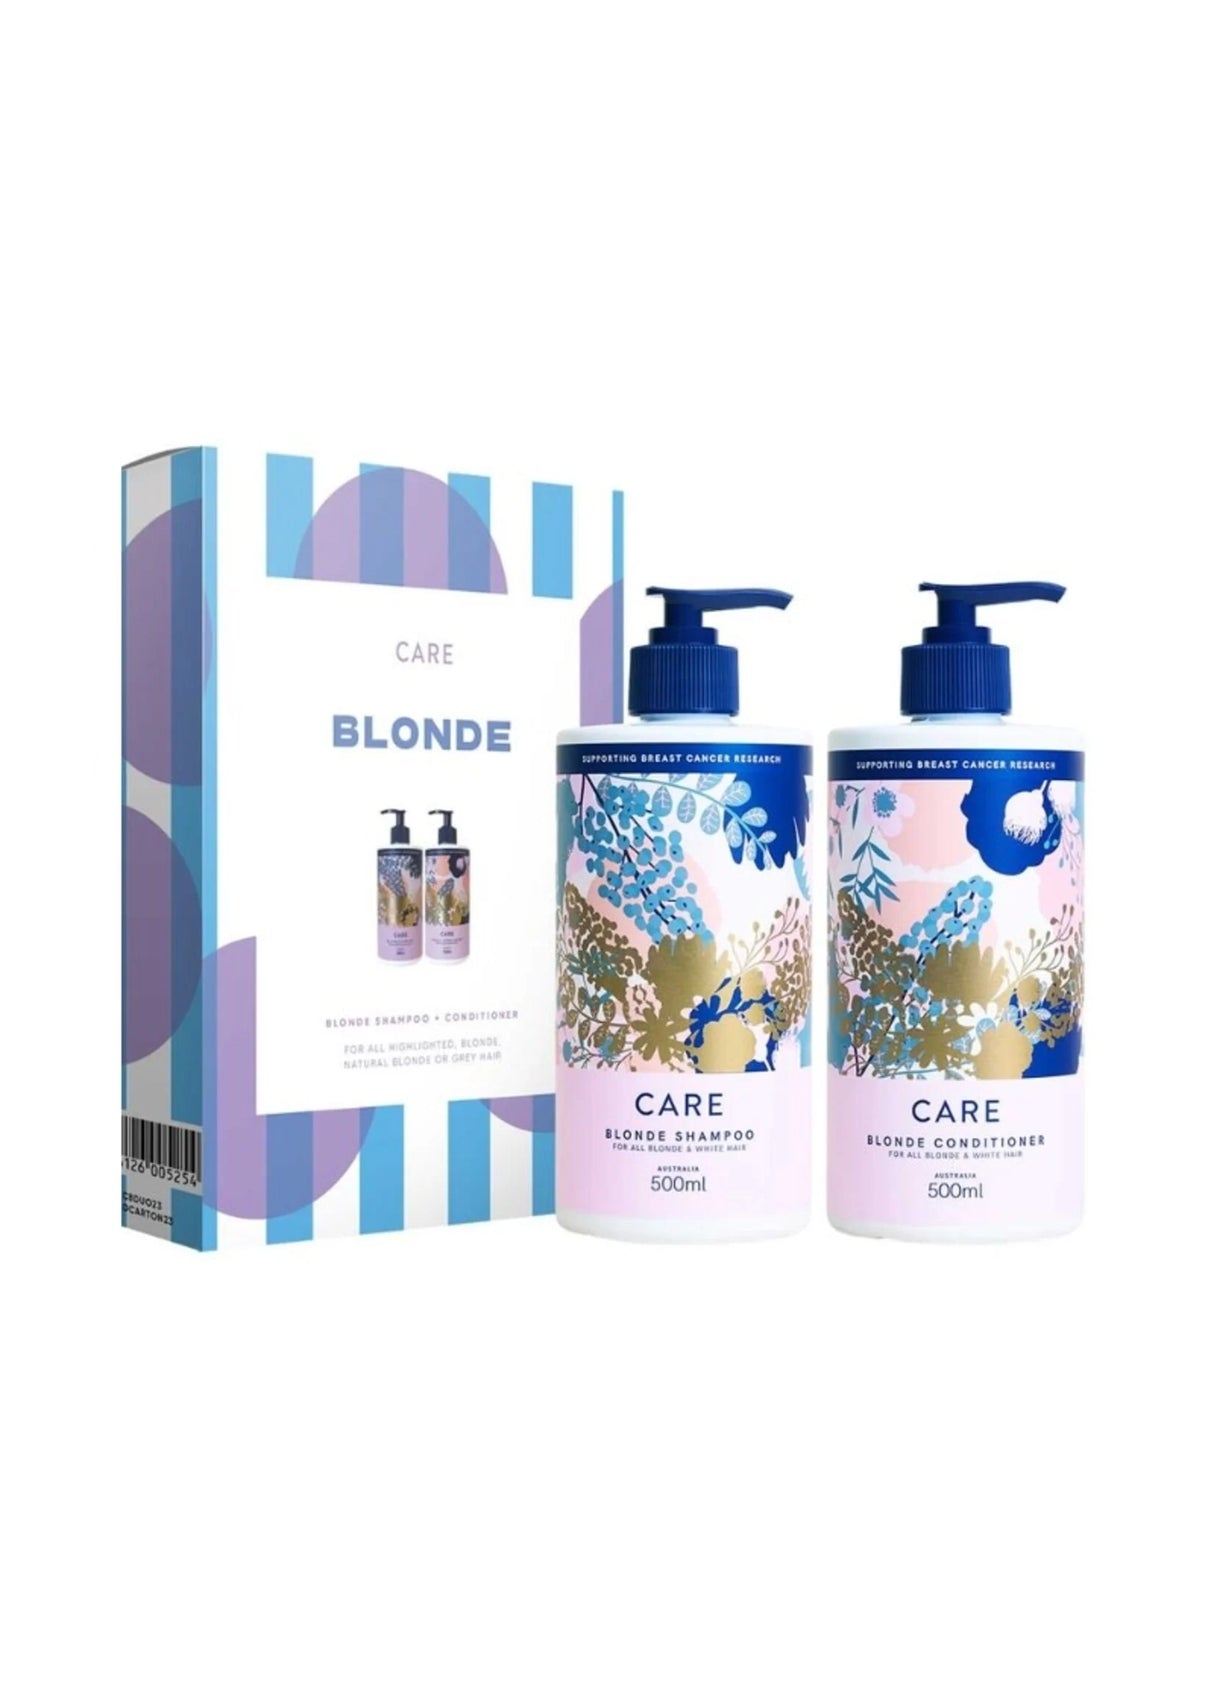 Nak Hair Care Blonde Shampoo and Conditioner 500ml Bundle